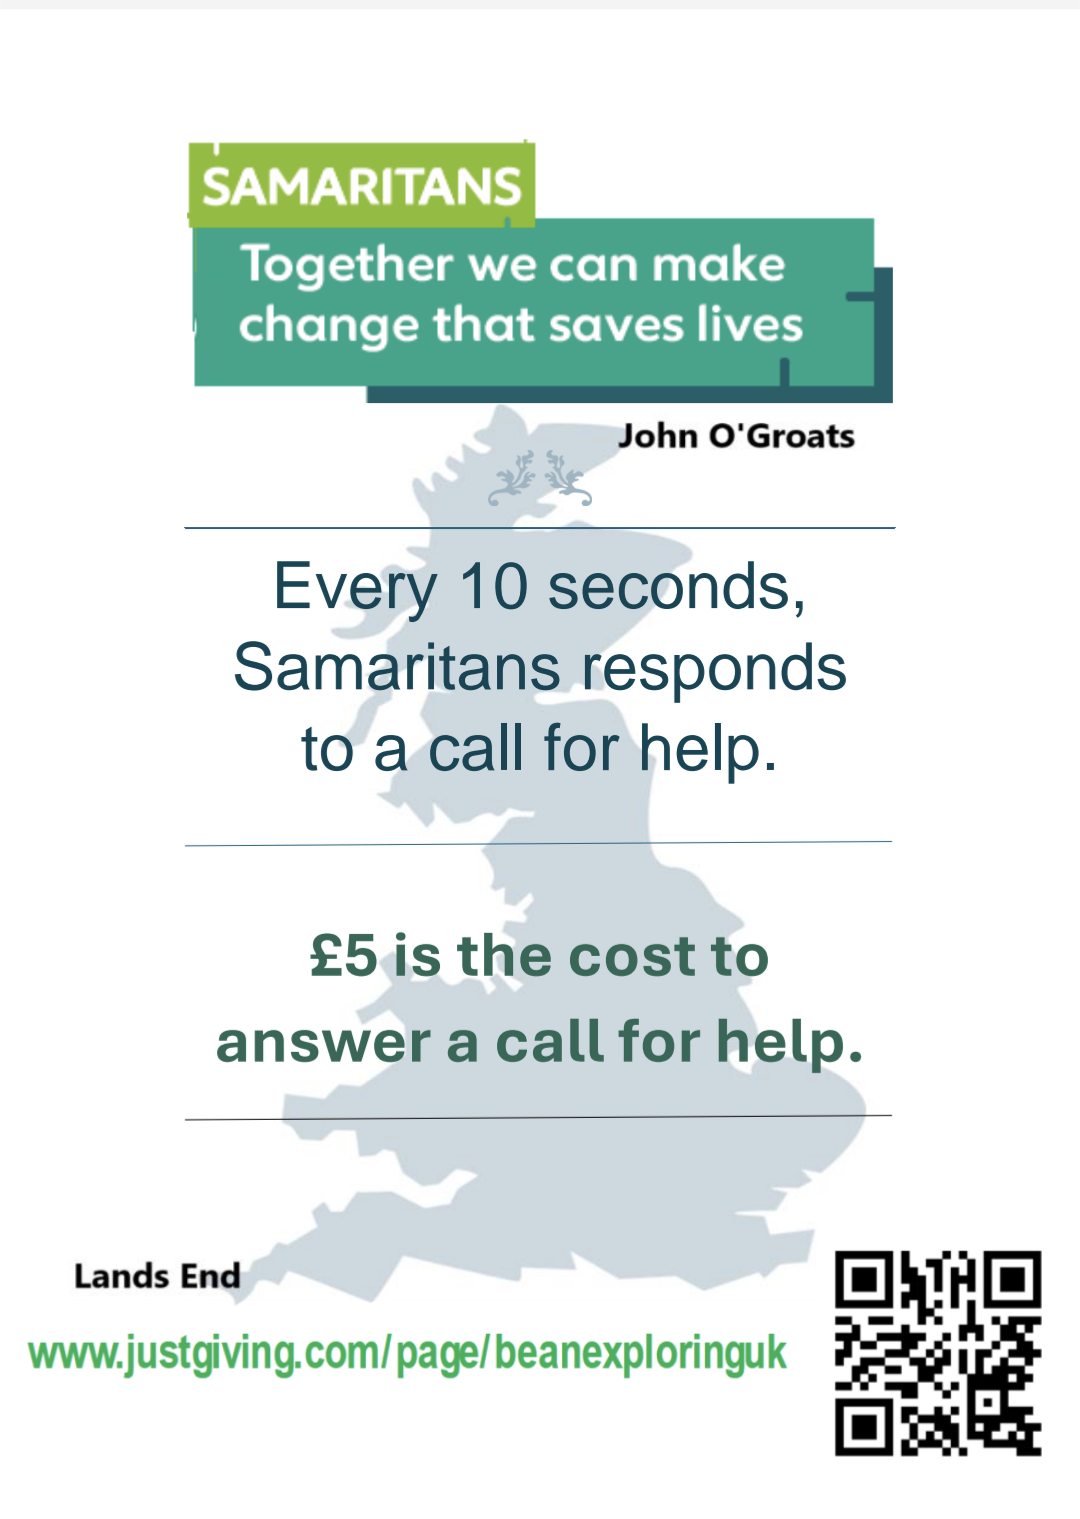 Samaritans: Answering Calls for Help Every 10 Seconds